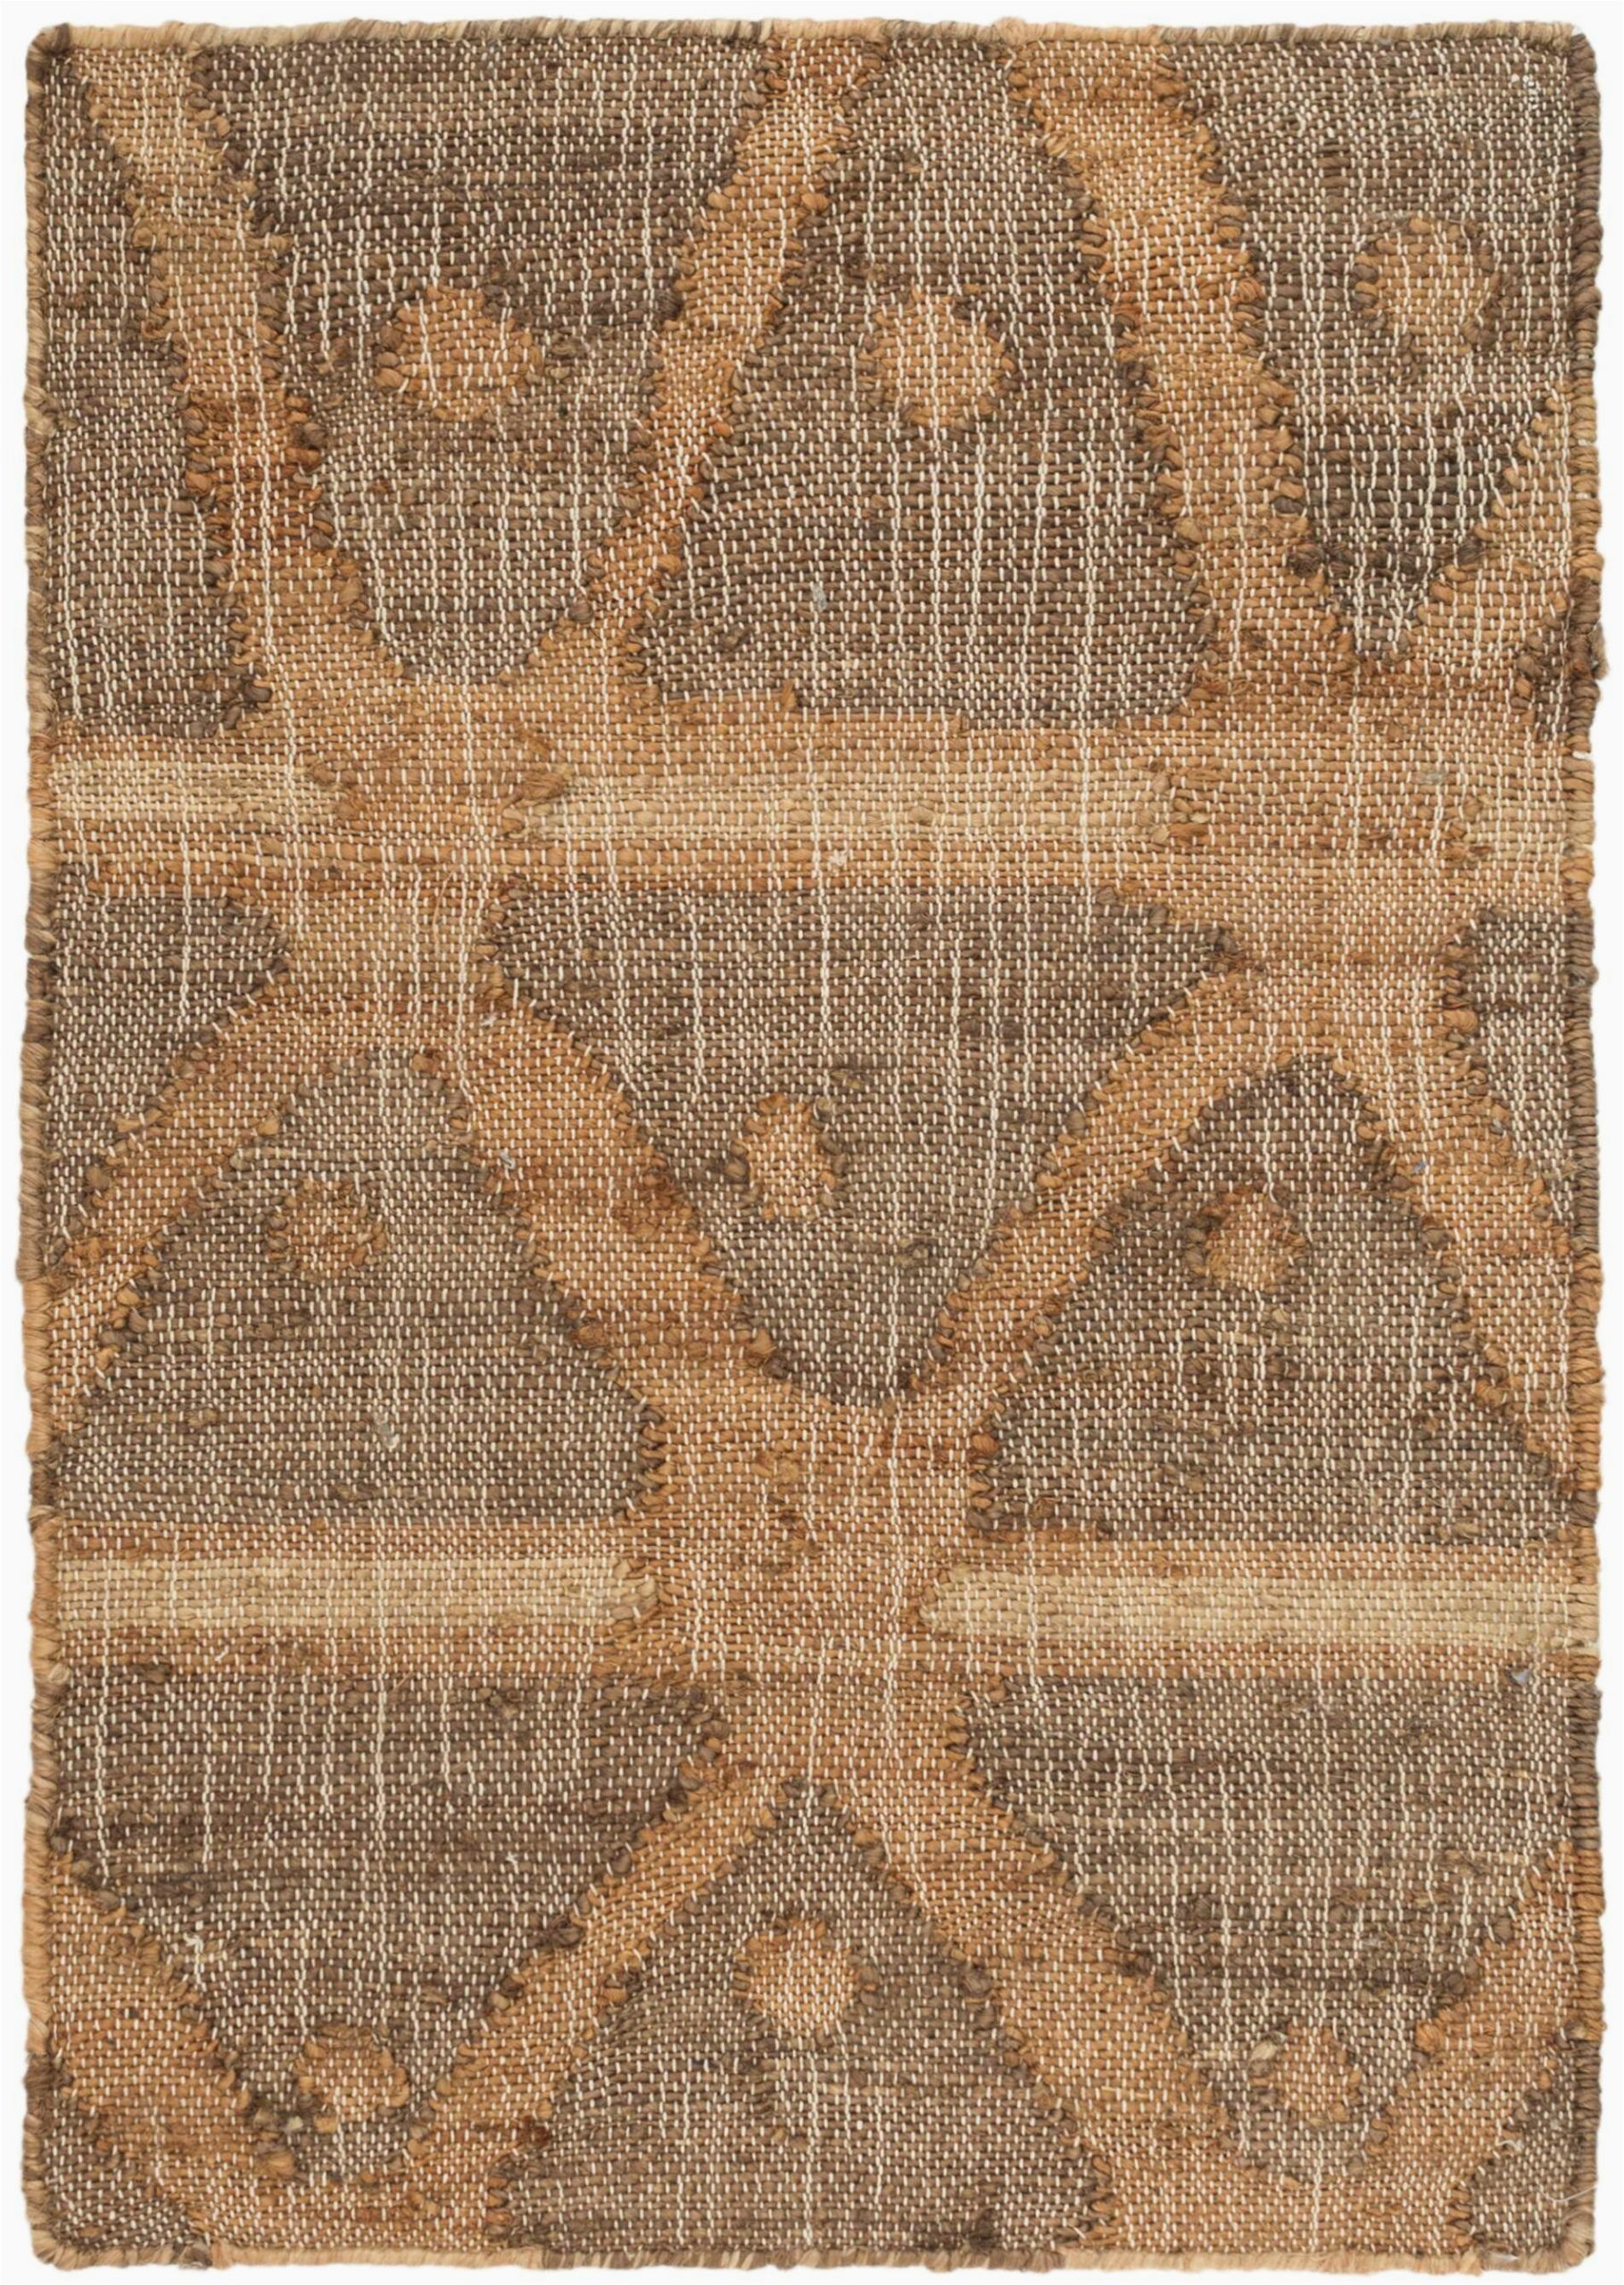 60 X 80 area Rug Rumi Geometric Hand Knotted Brown area Rug